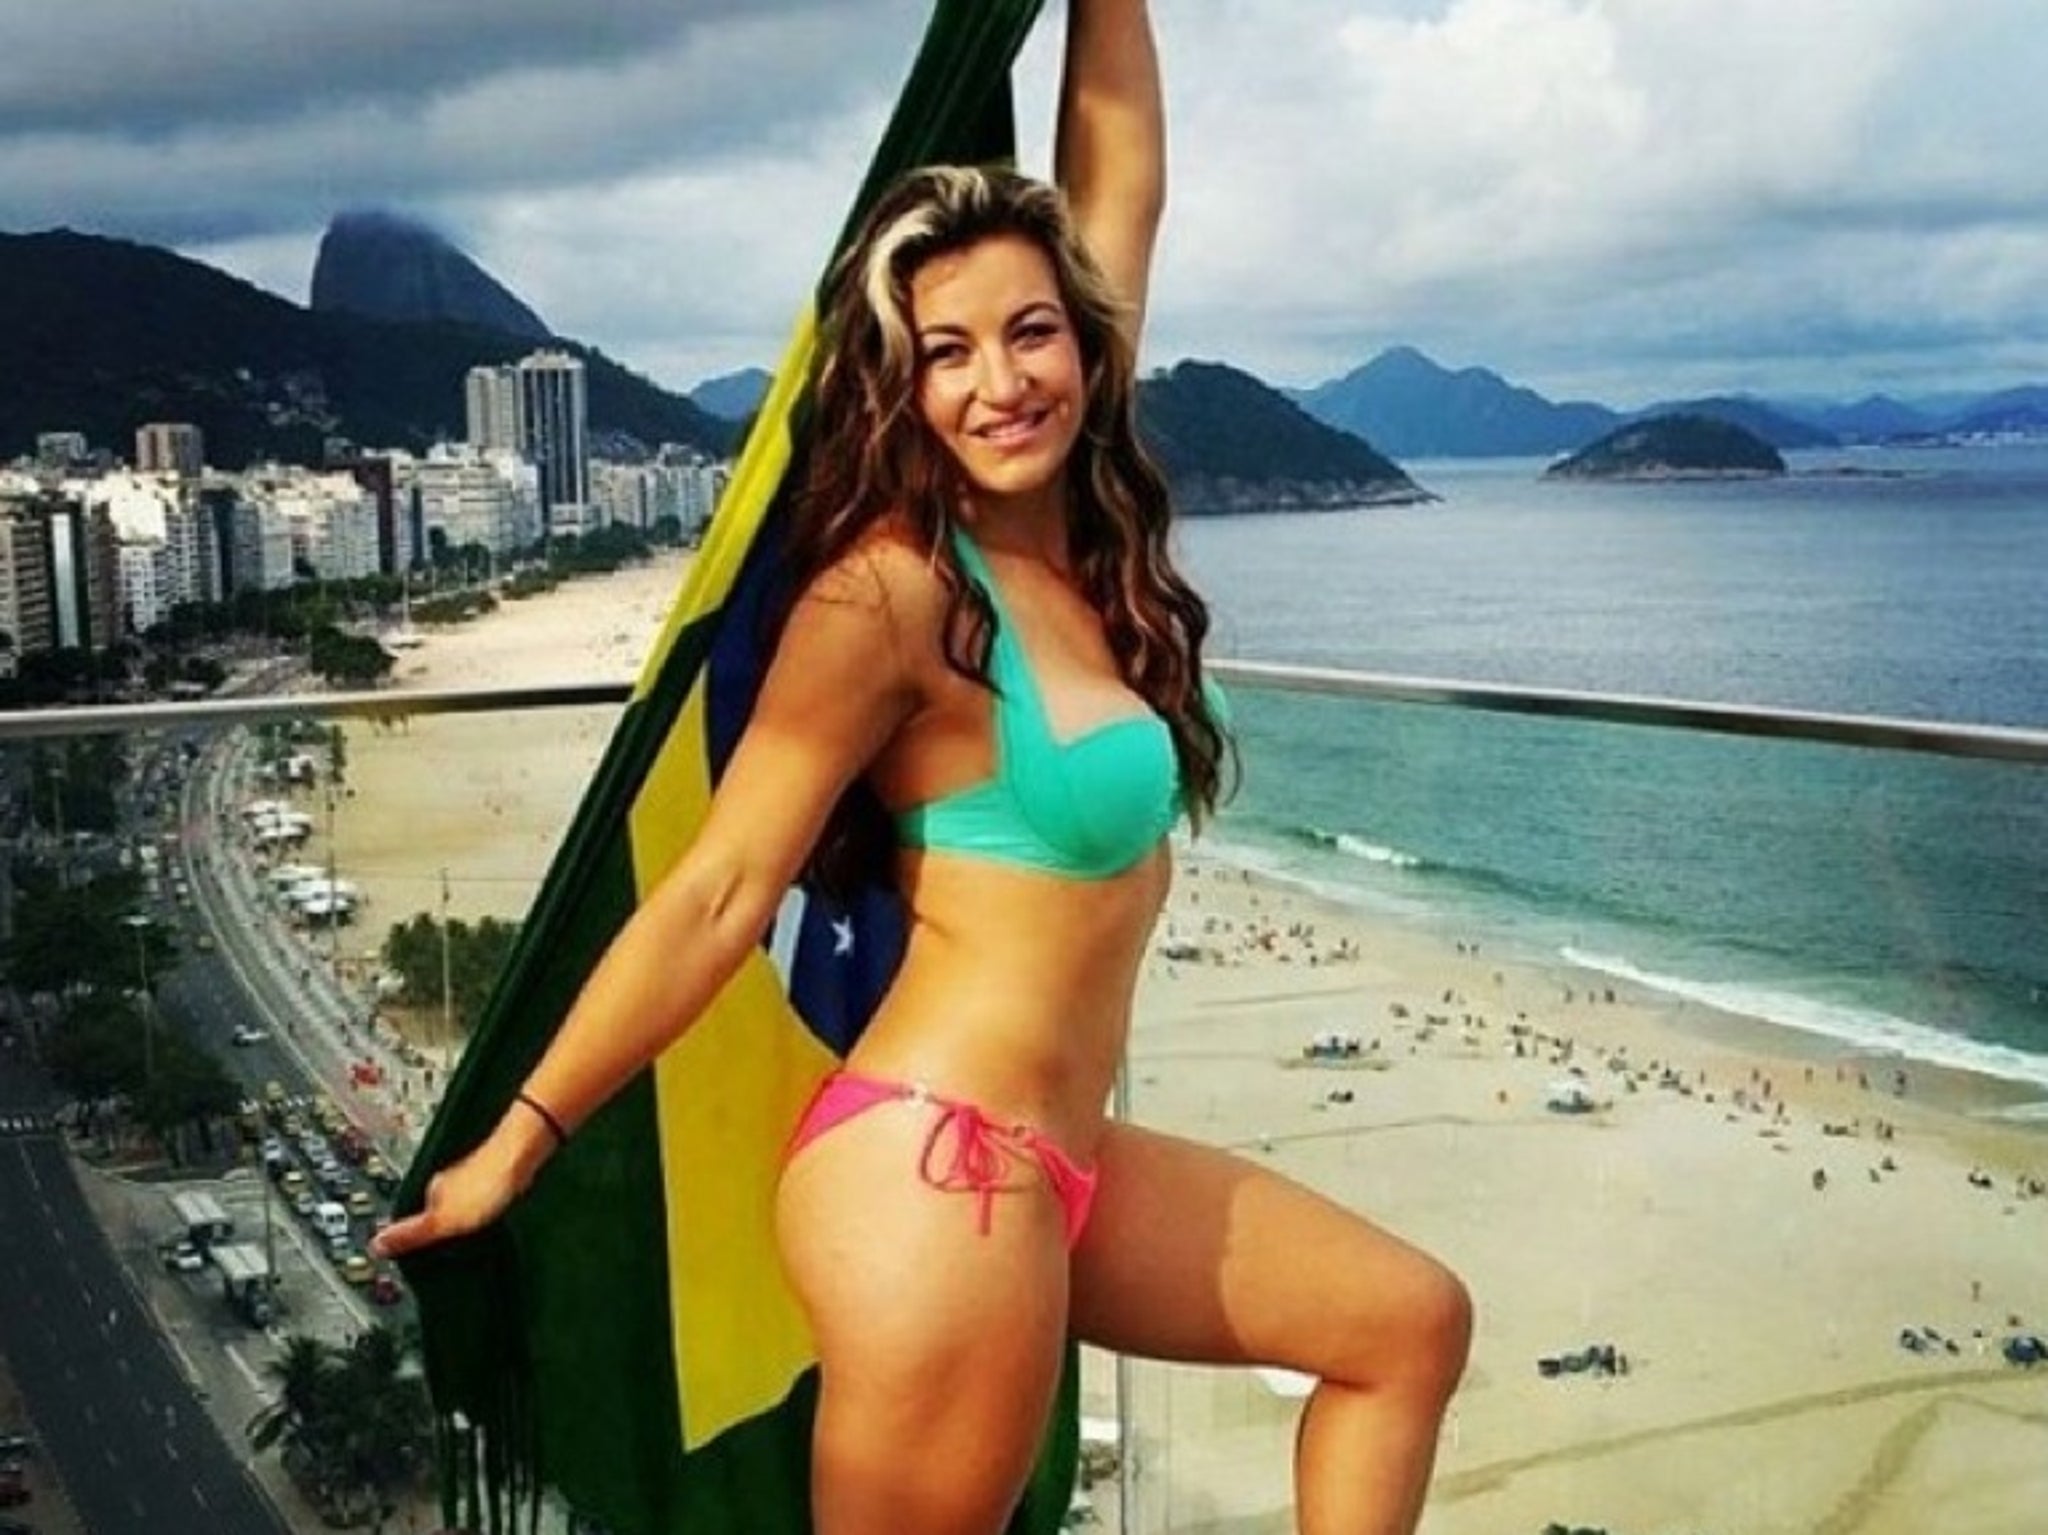 Pic) Hot girl in thong is not Miesha Tate  but does it matter? 